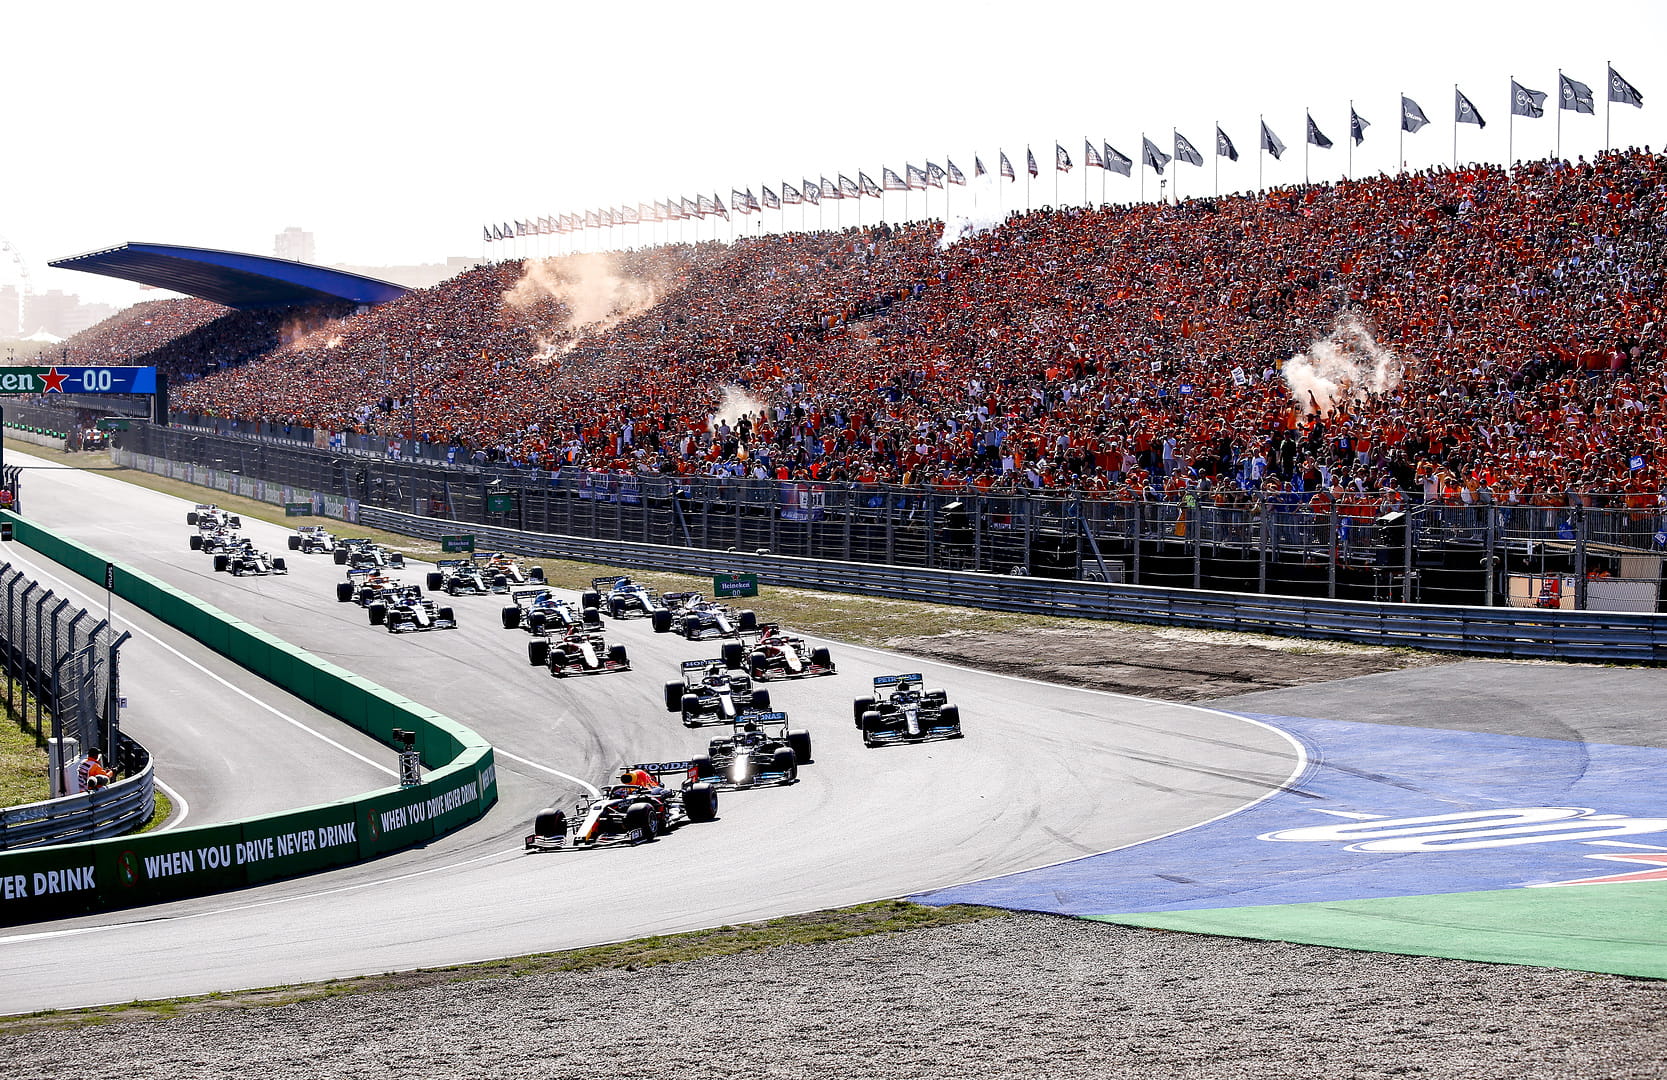 Packed grandstands watching the start of the 2021 Dutch Grand Prix.